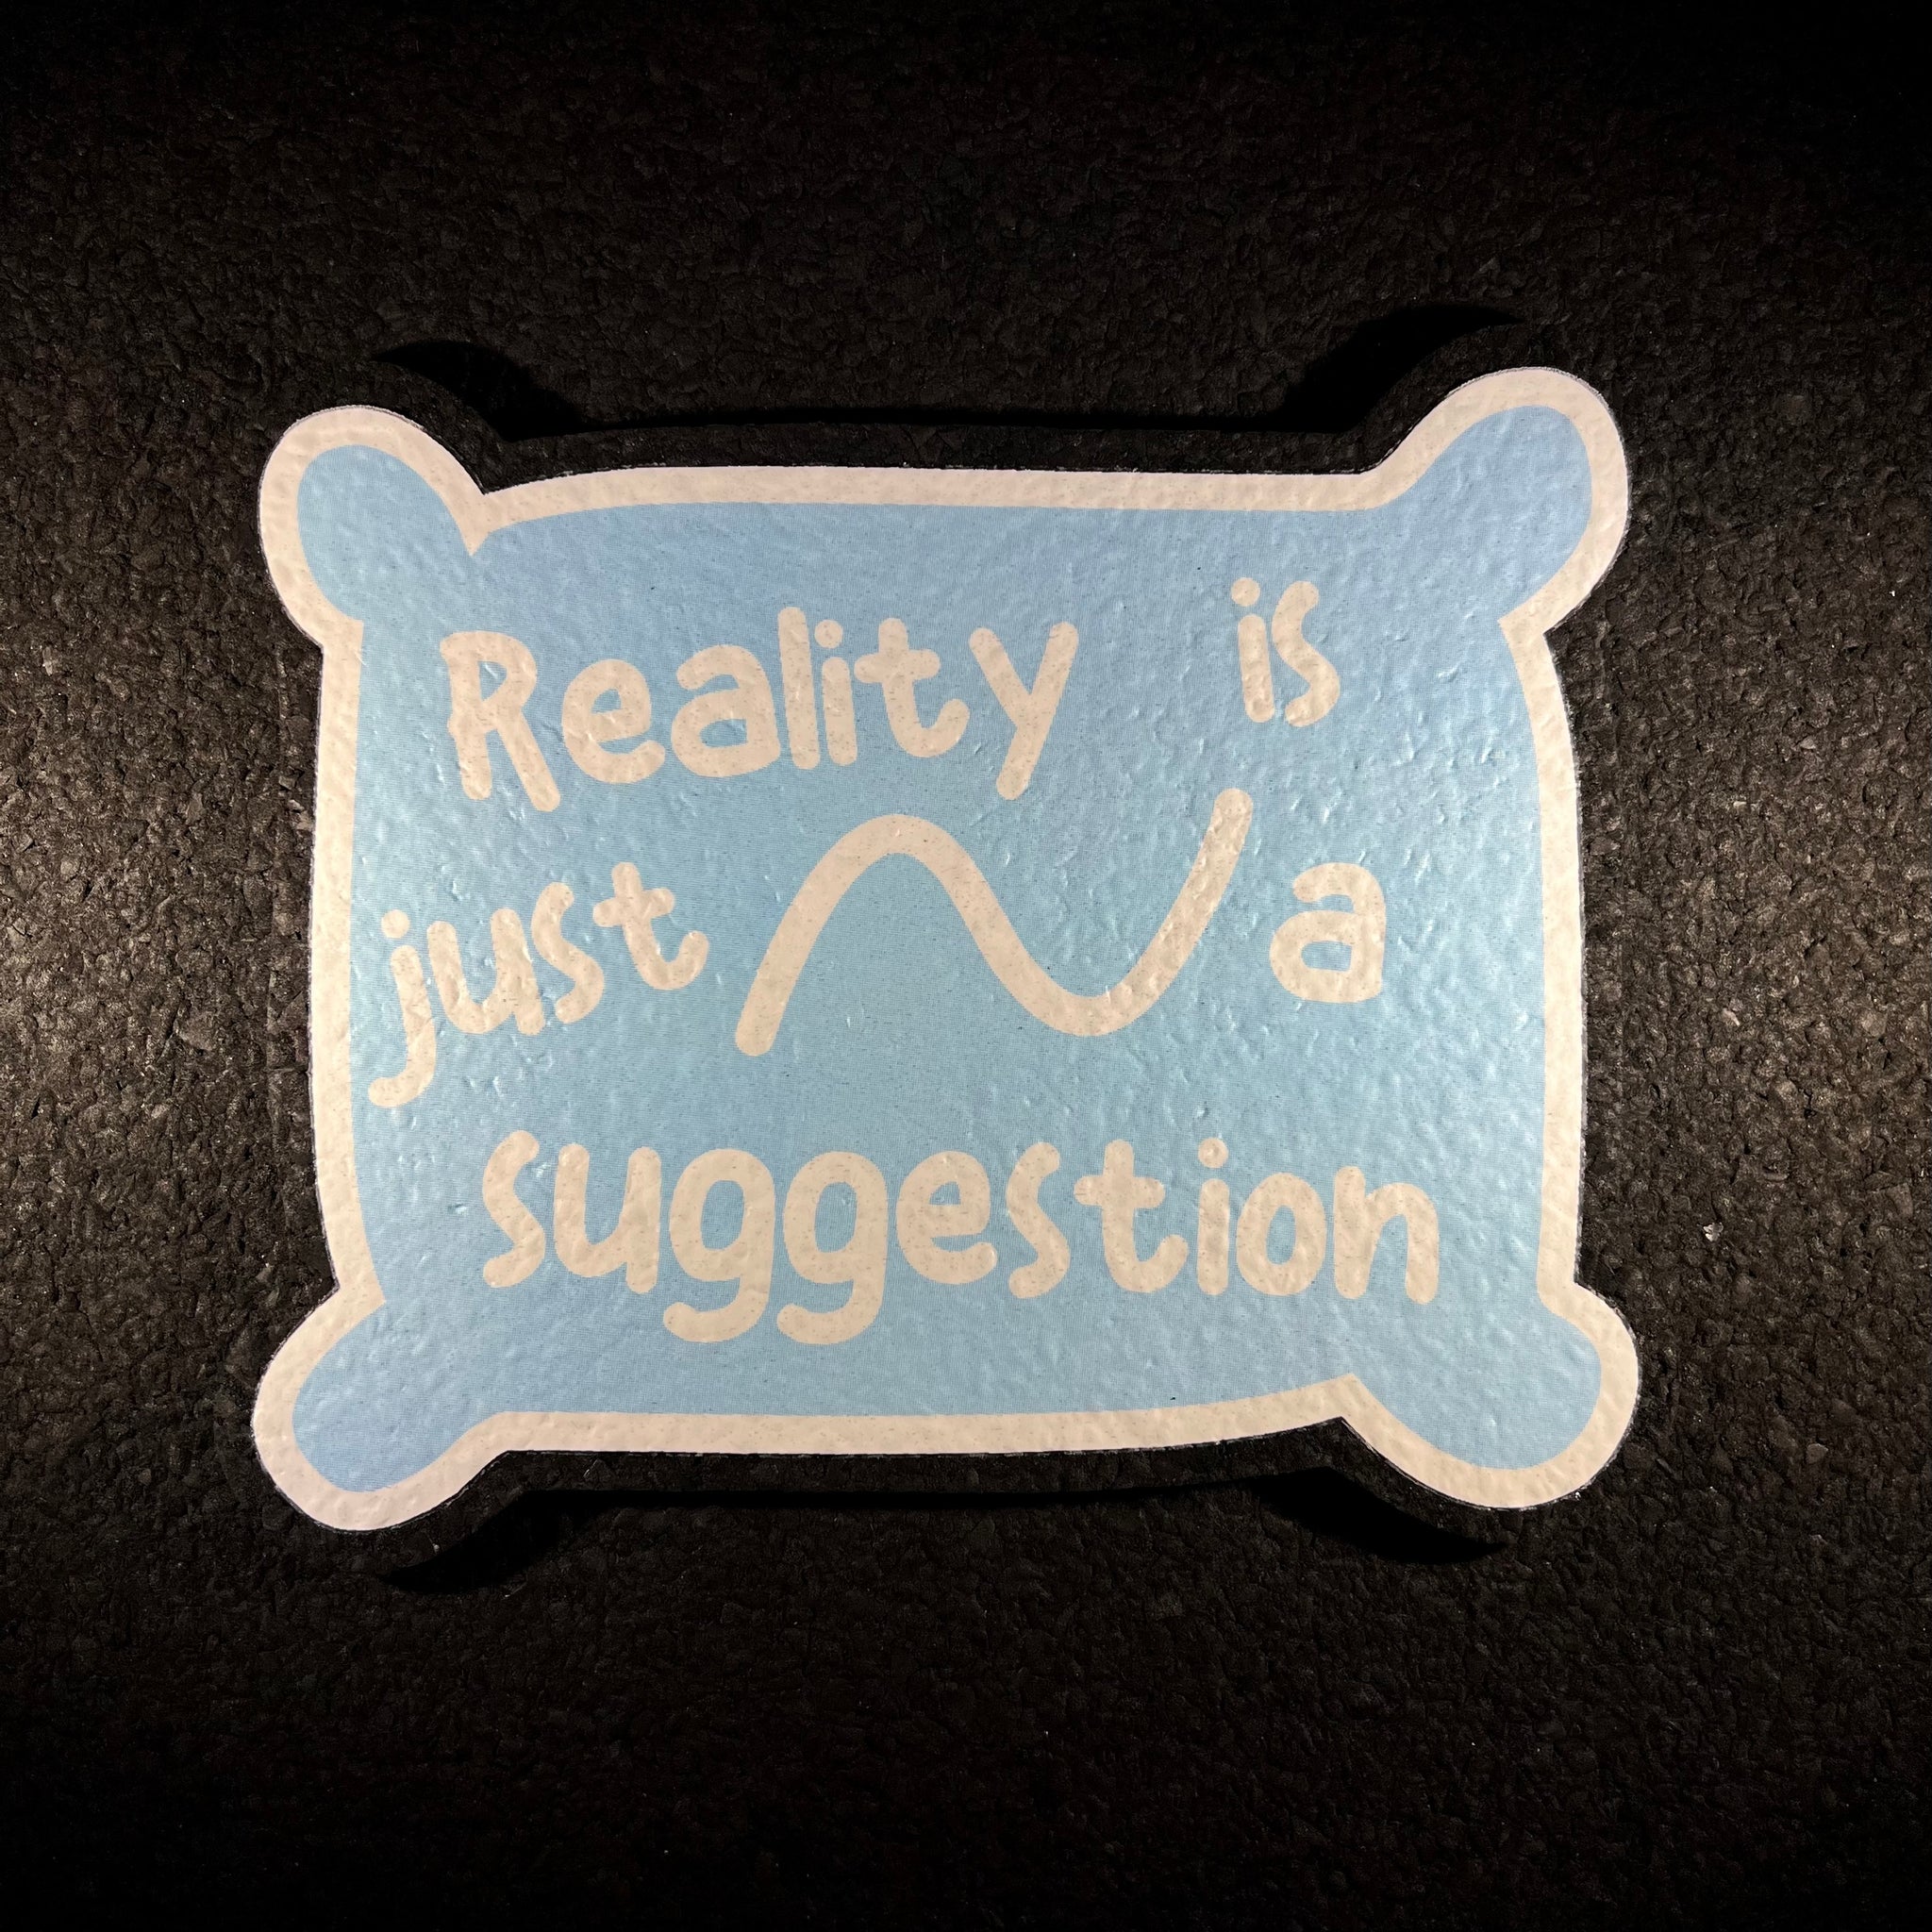 Roysco Glass - "Reality is just a suggestion" moodmat